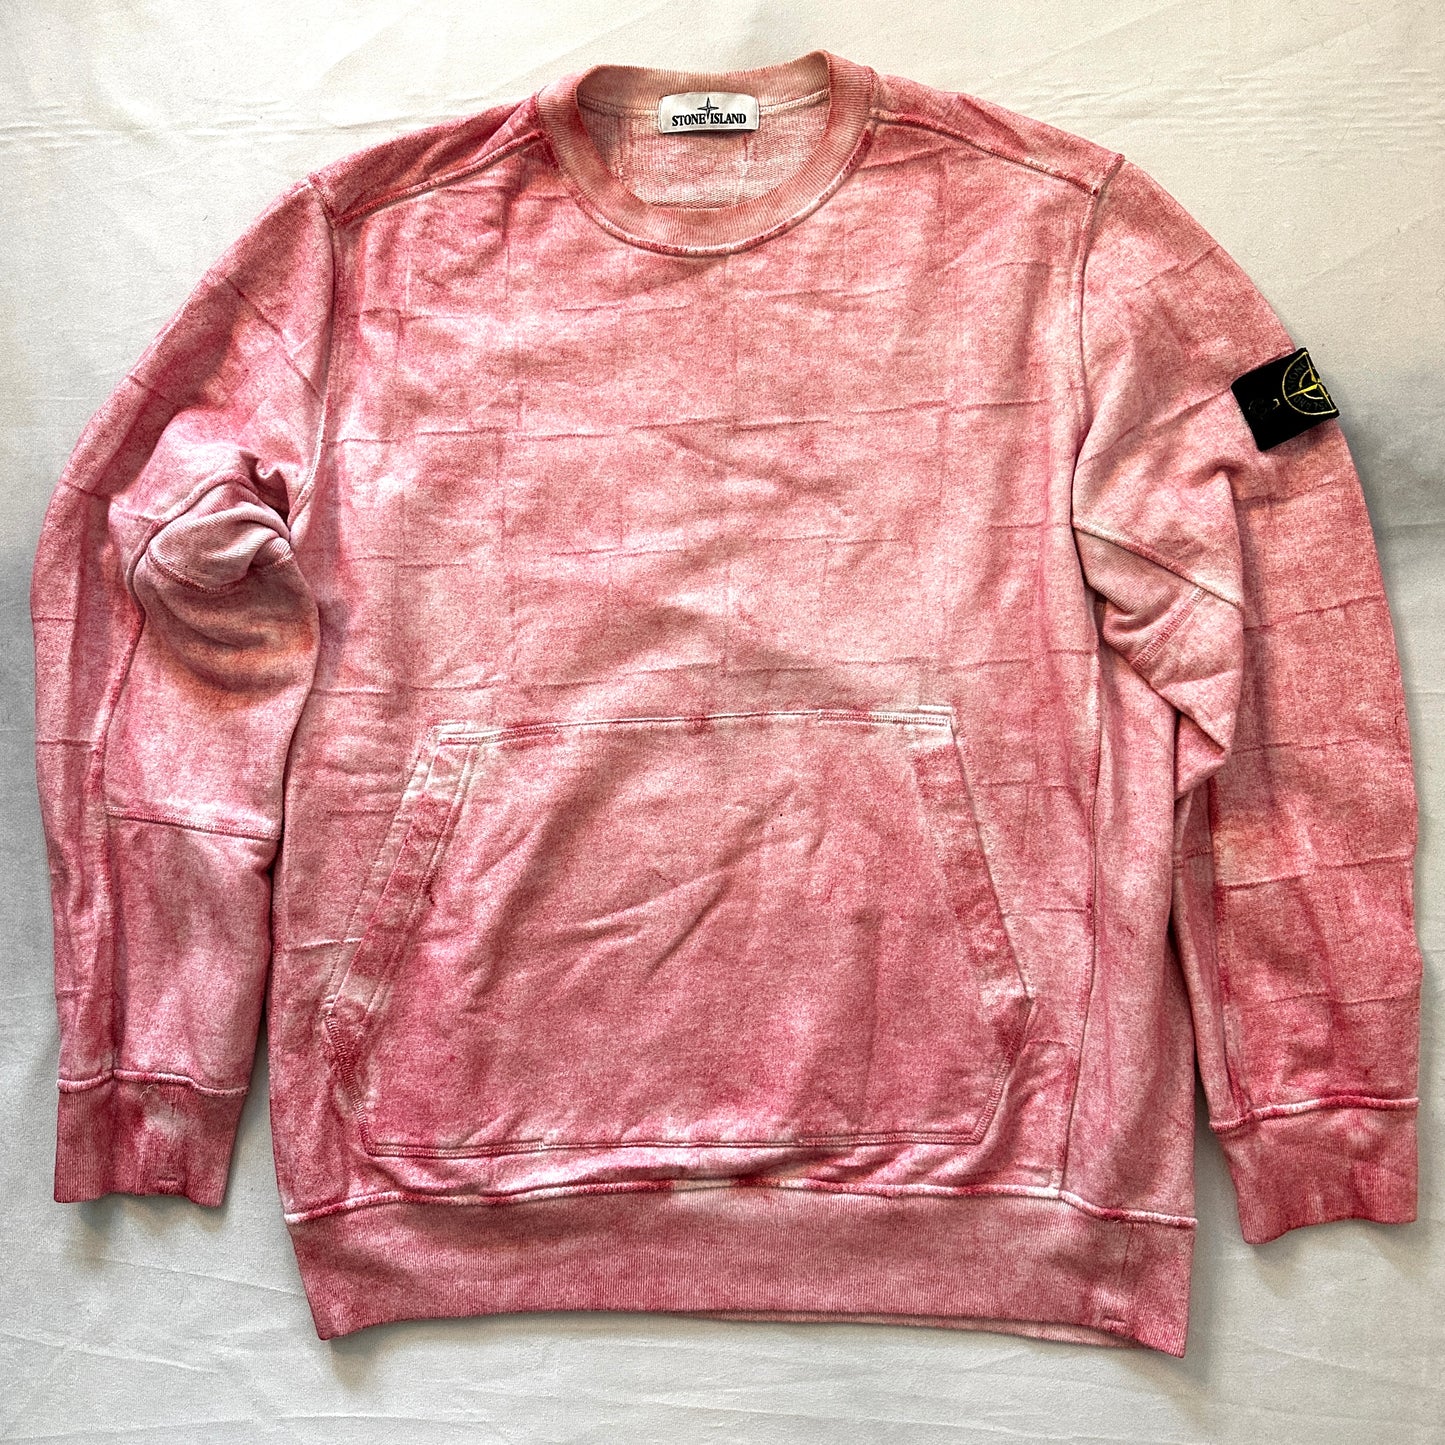 Stone Island 2017 House Check with Dust Colour Treatment Sweatshirt - XXL - Made in Italy